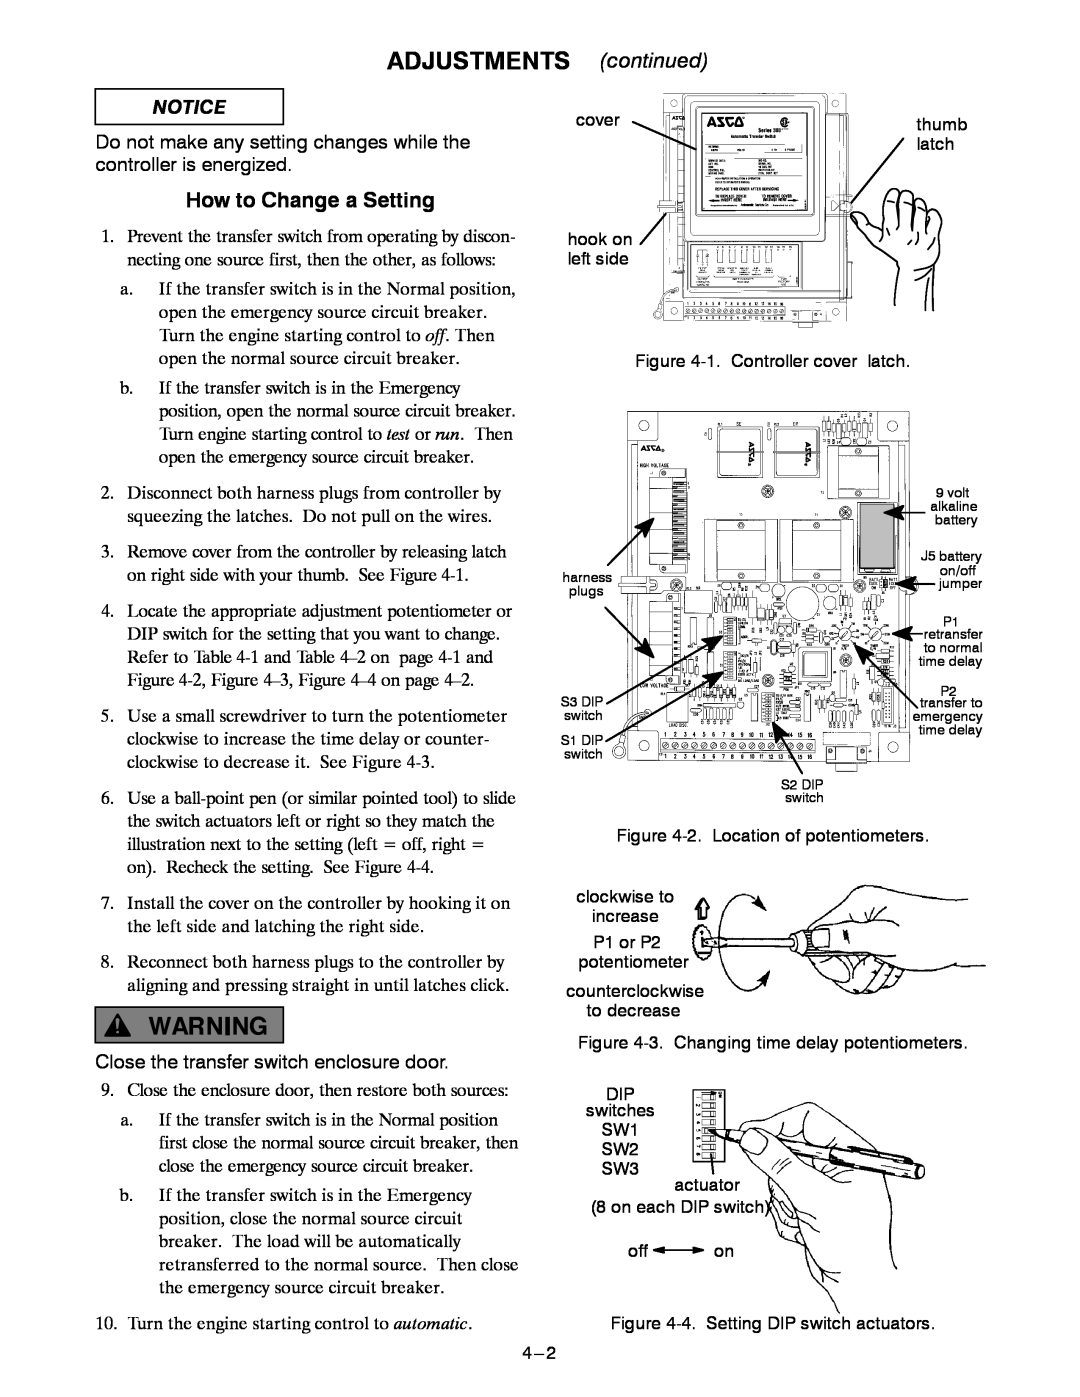 Emerson 400A manual ADJUSTMENTS continued, How to Change a Setting, Close the transfer switch enclosure door 